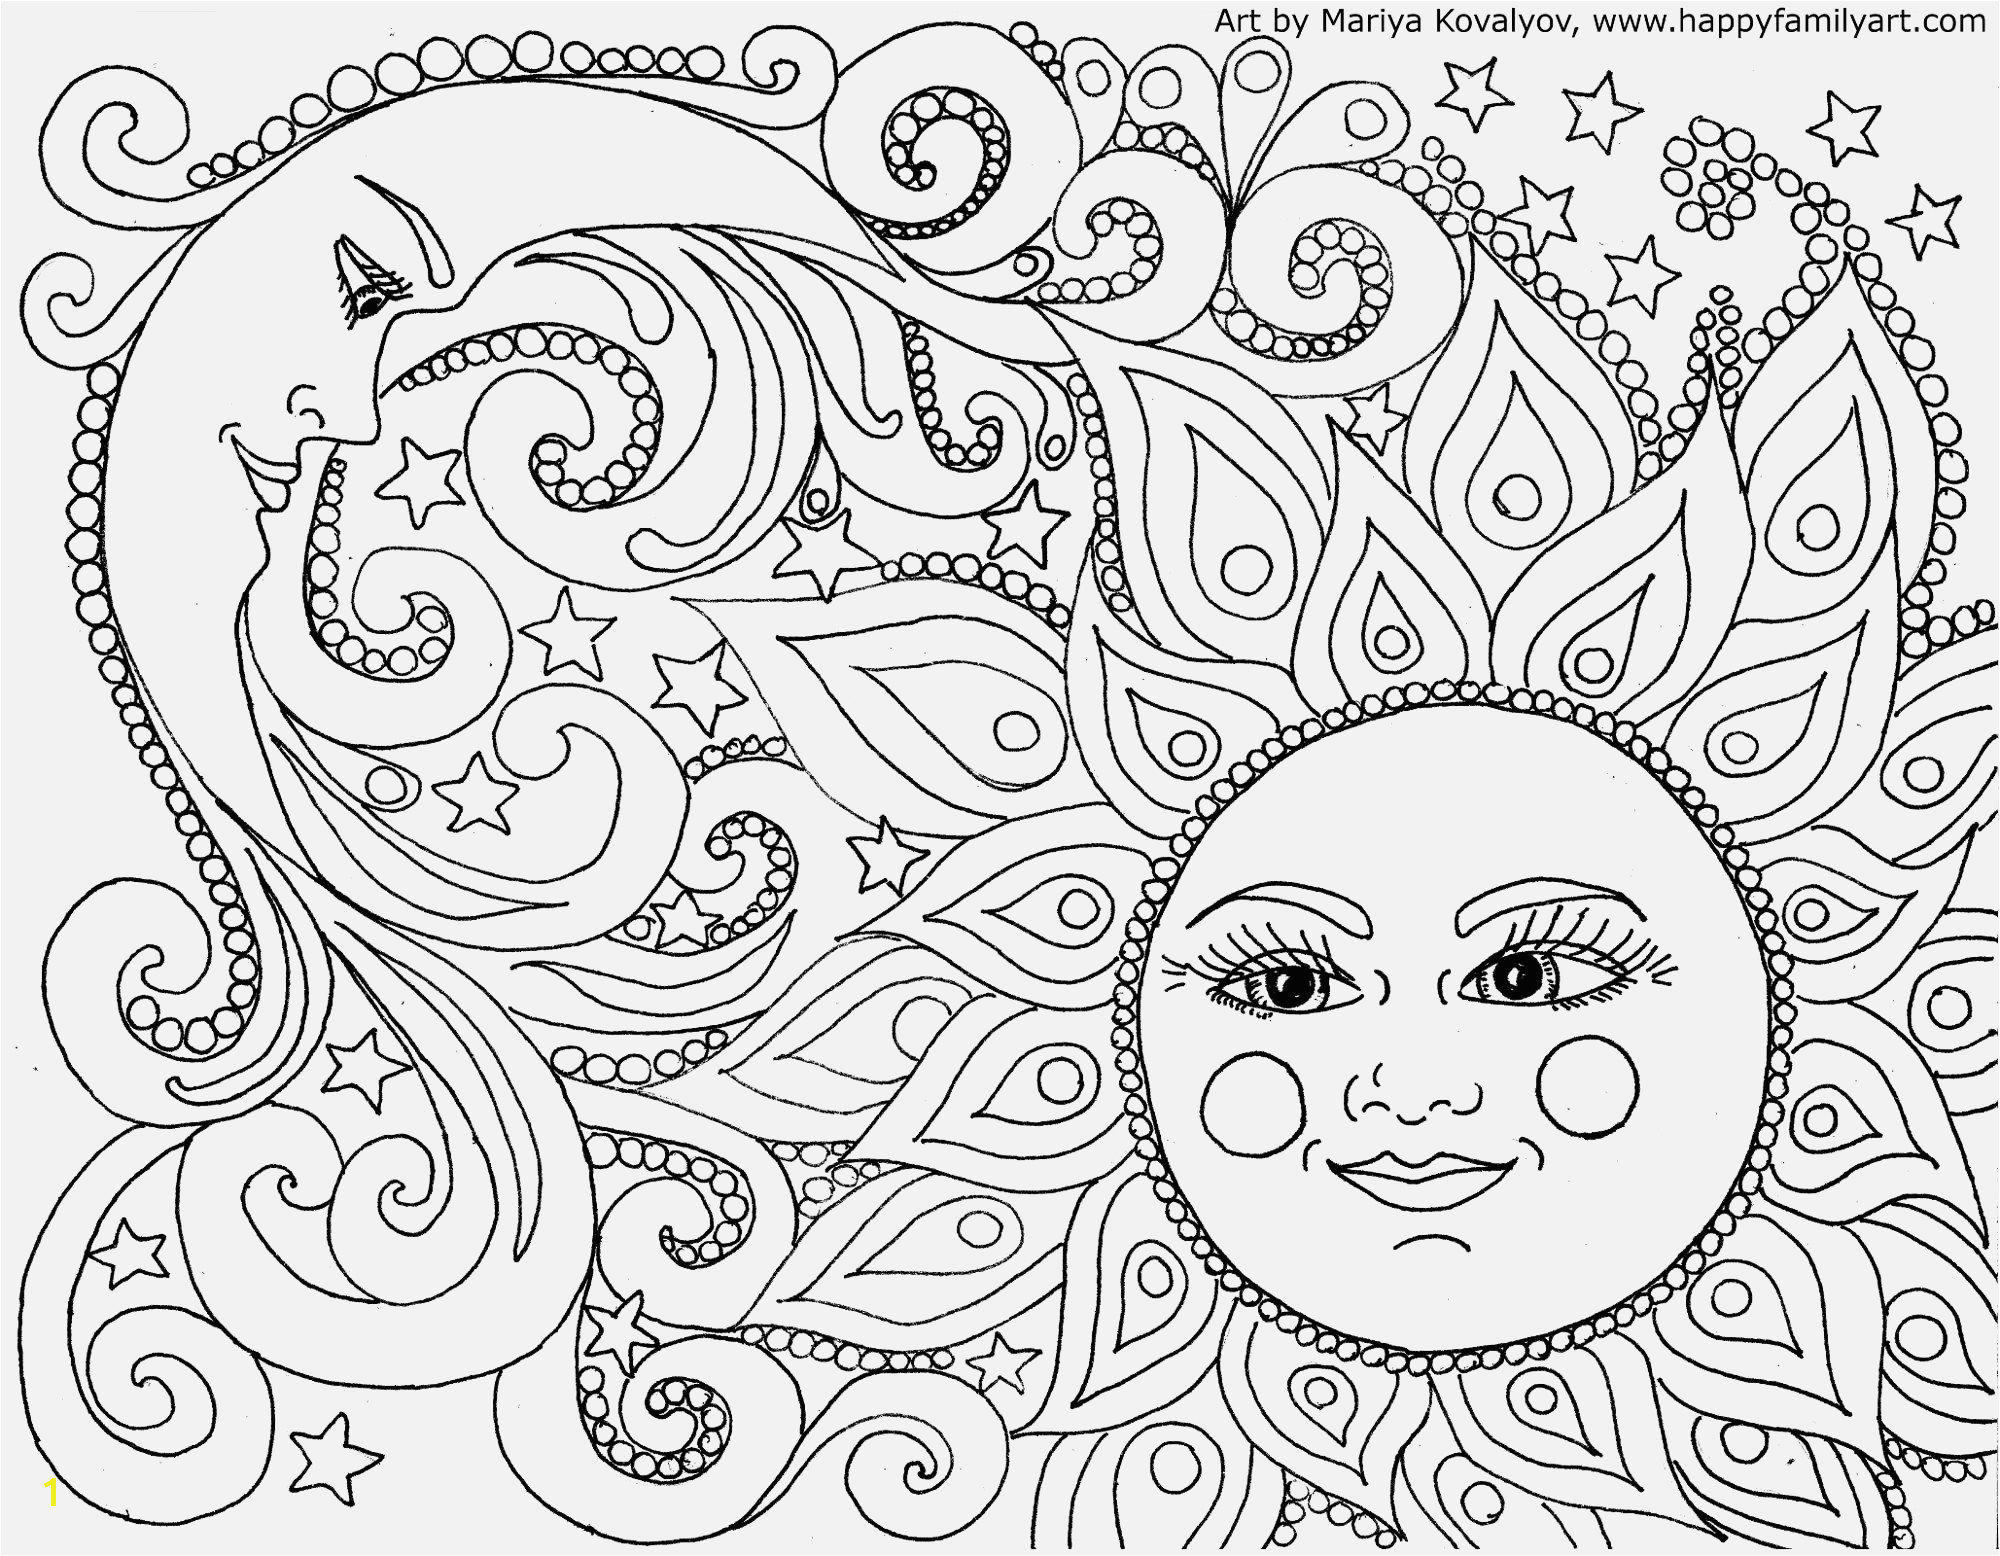 top coloring pages websites coloring pagespatriots coloring pages and print for free best coloringpatriots coloring